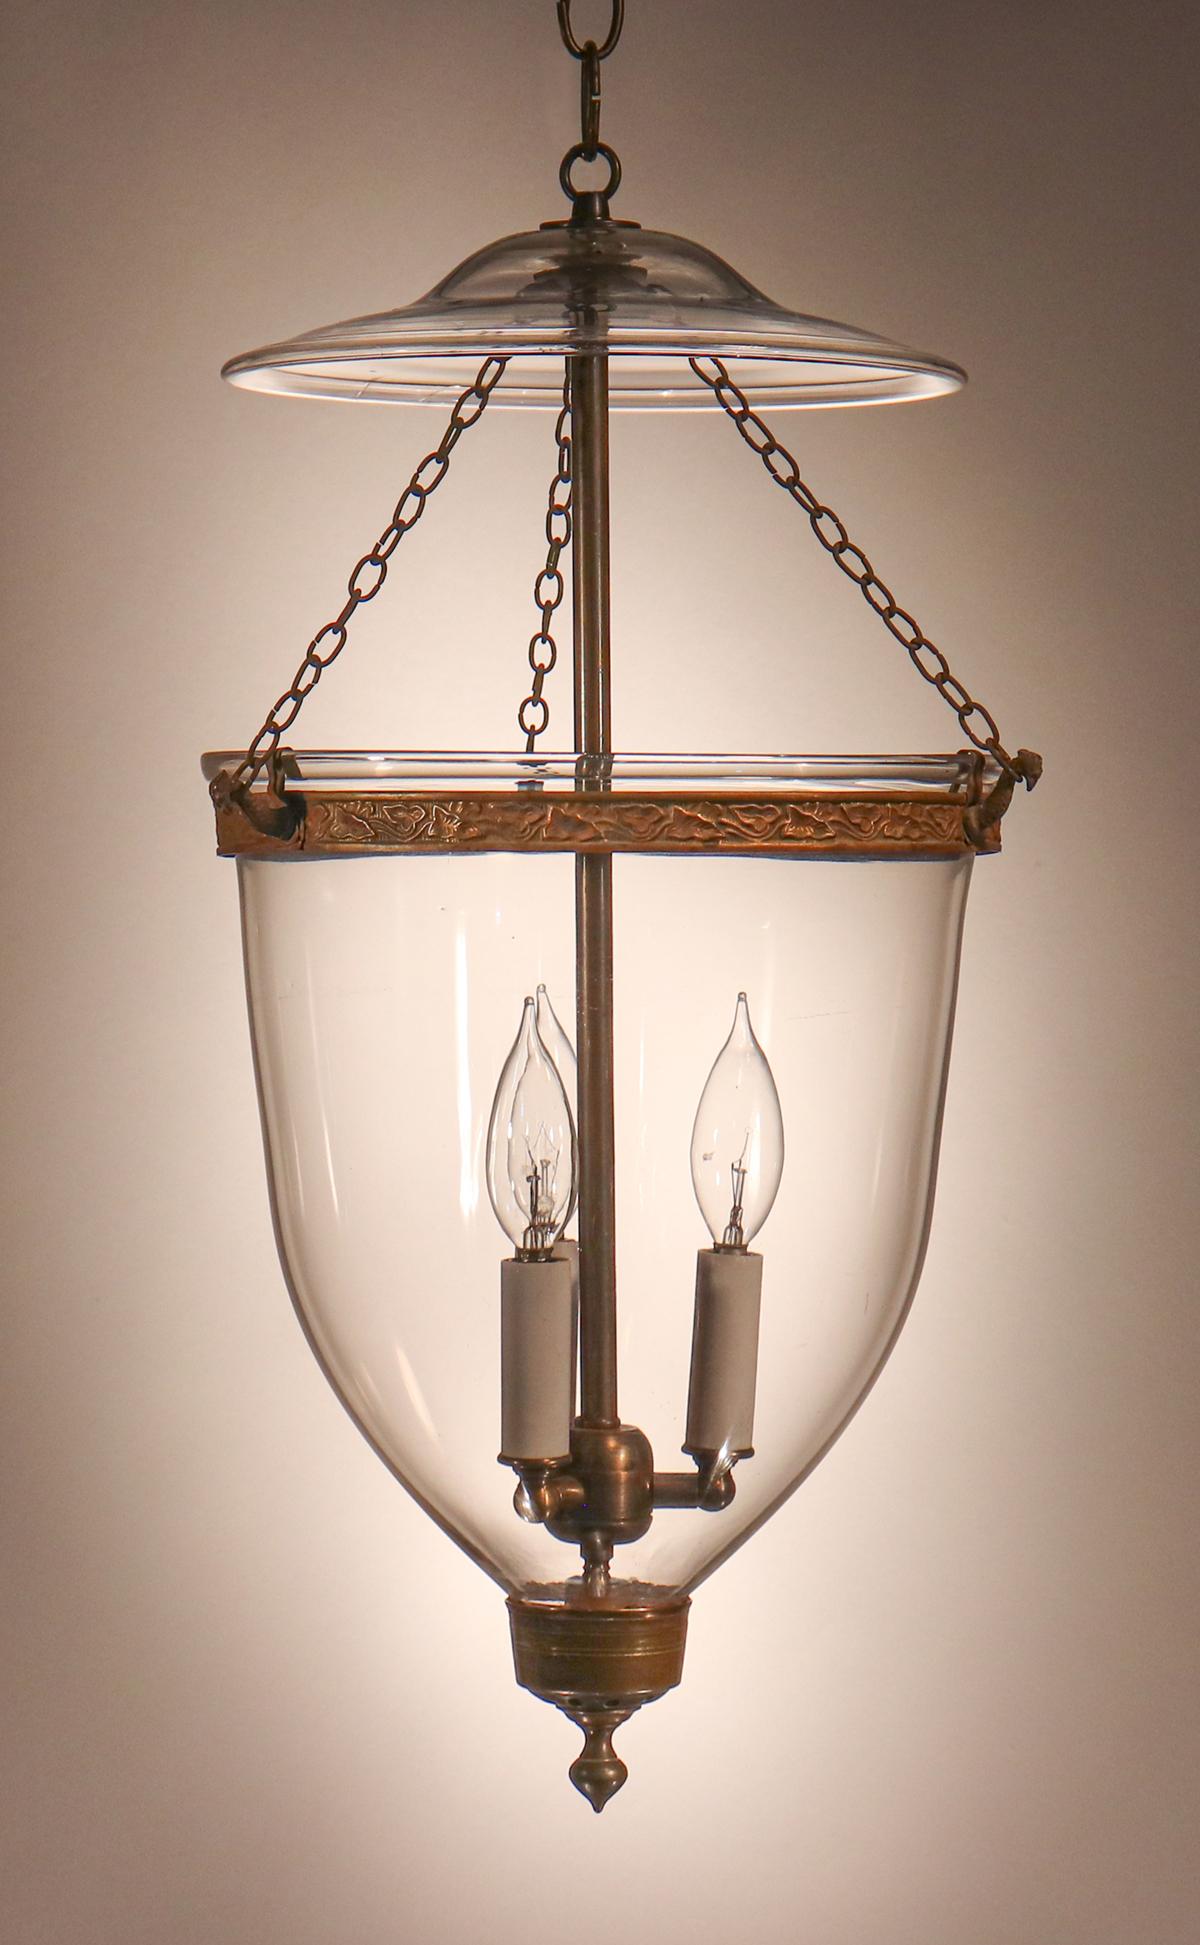 A beautiful, classic English bell jar lantern with clear hand blown glass. This circa 1850 lantern features an original embossed band and teardrop finial/candleholder base. It has been newly electrified with a three-bulb candelabra cluster. The